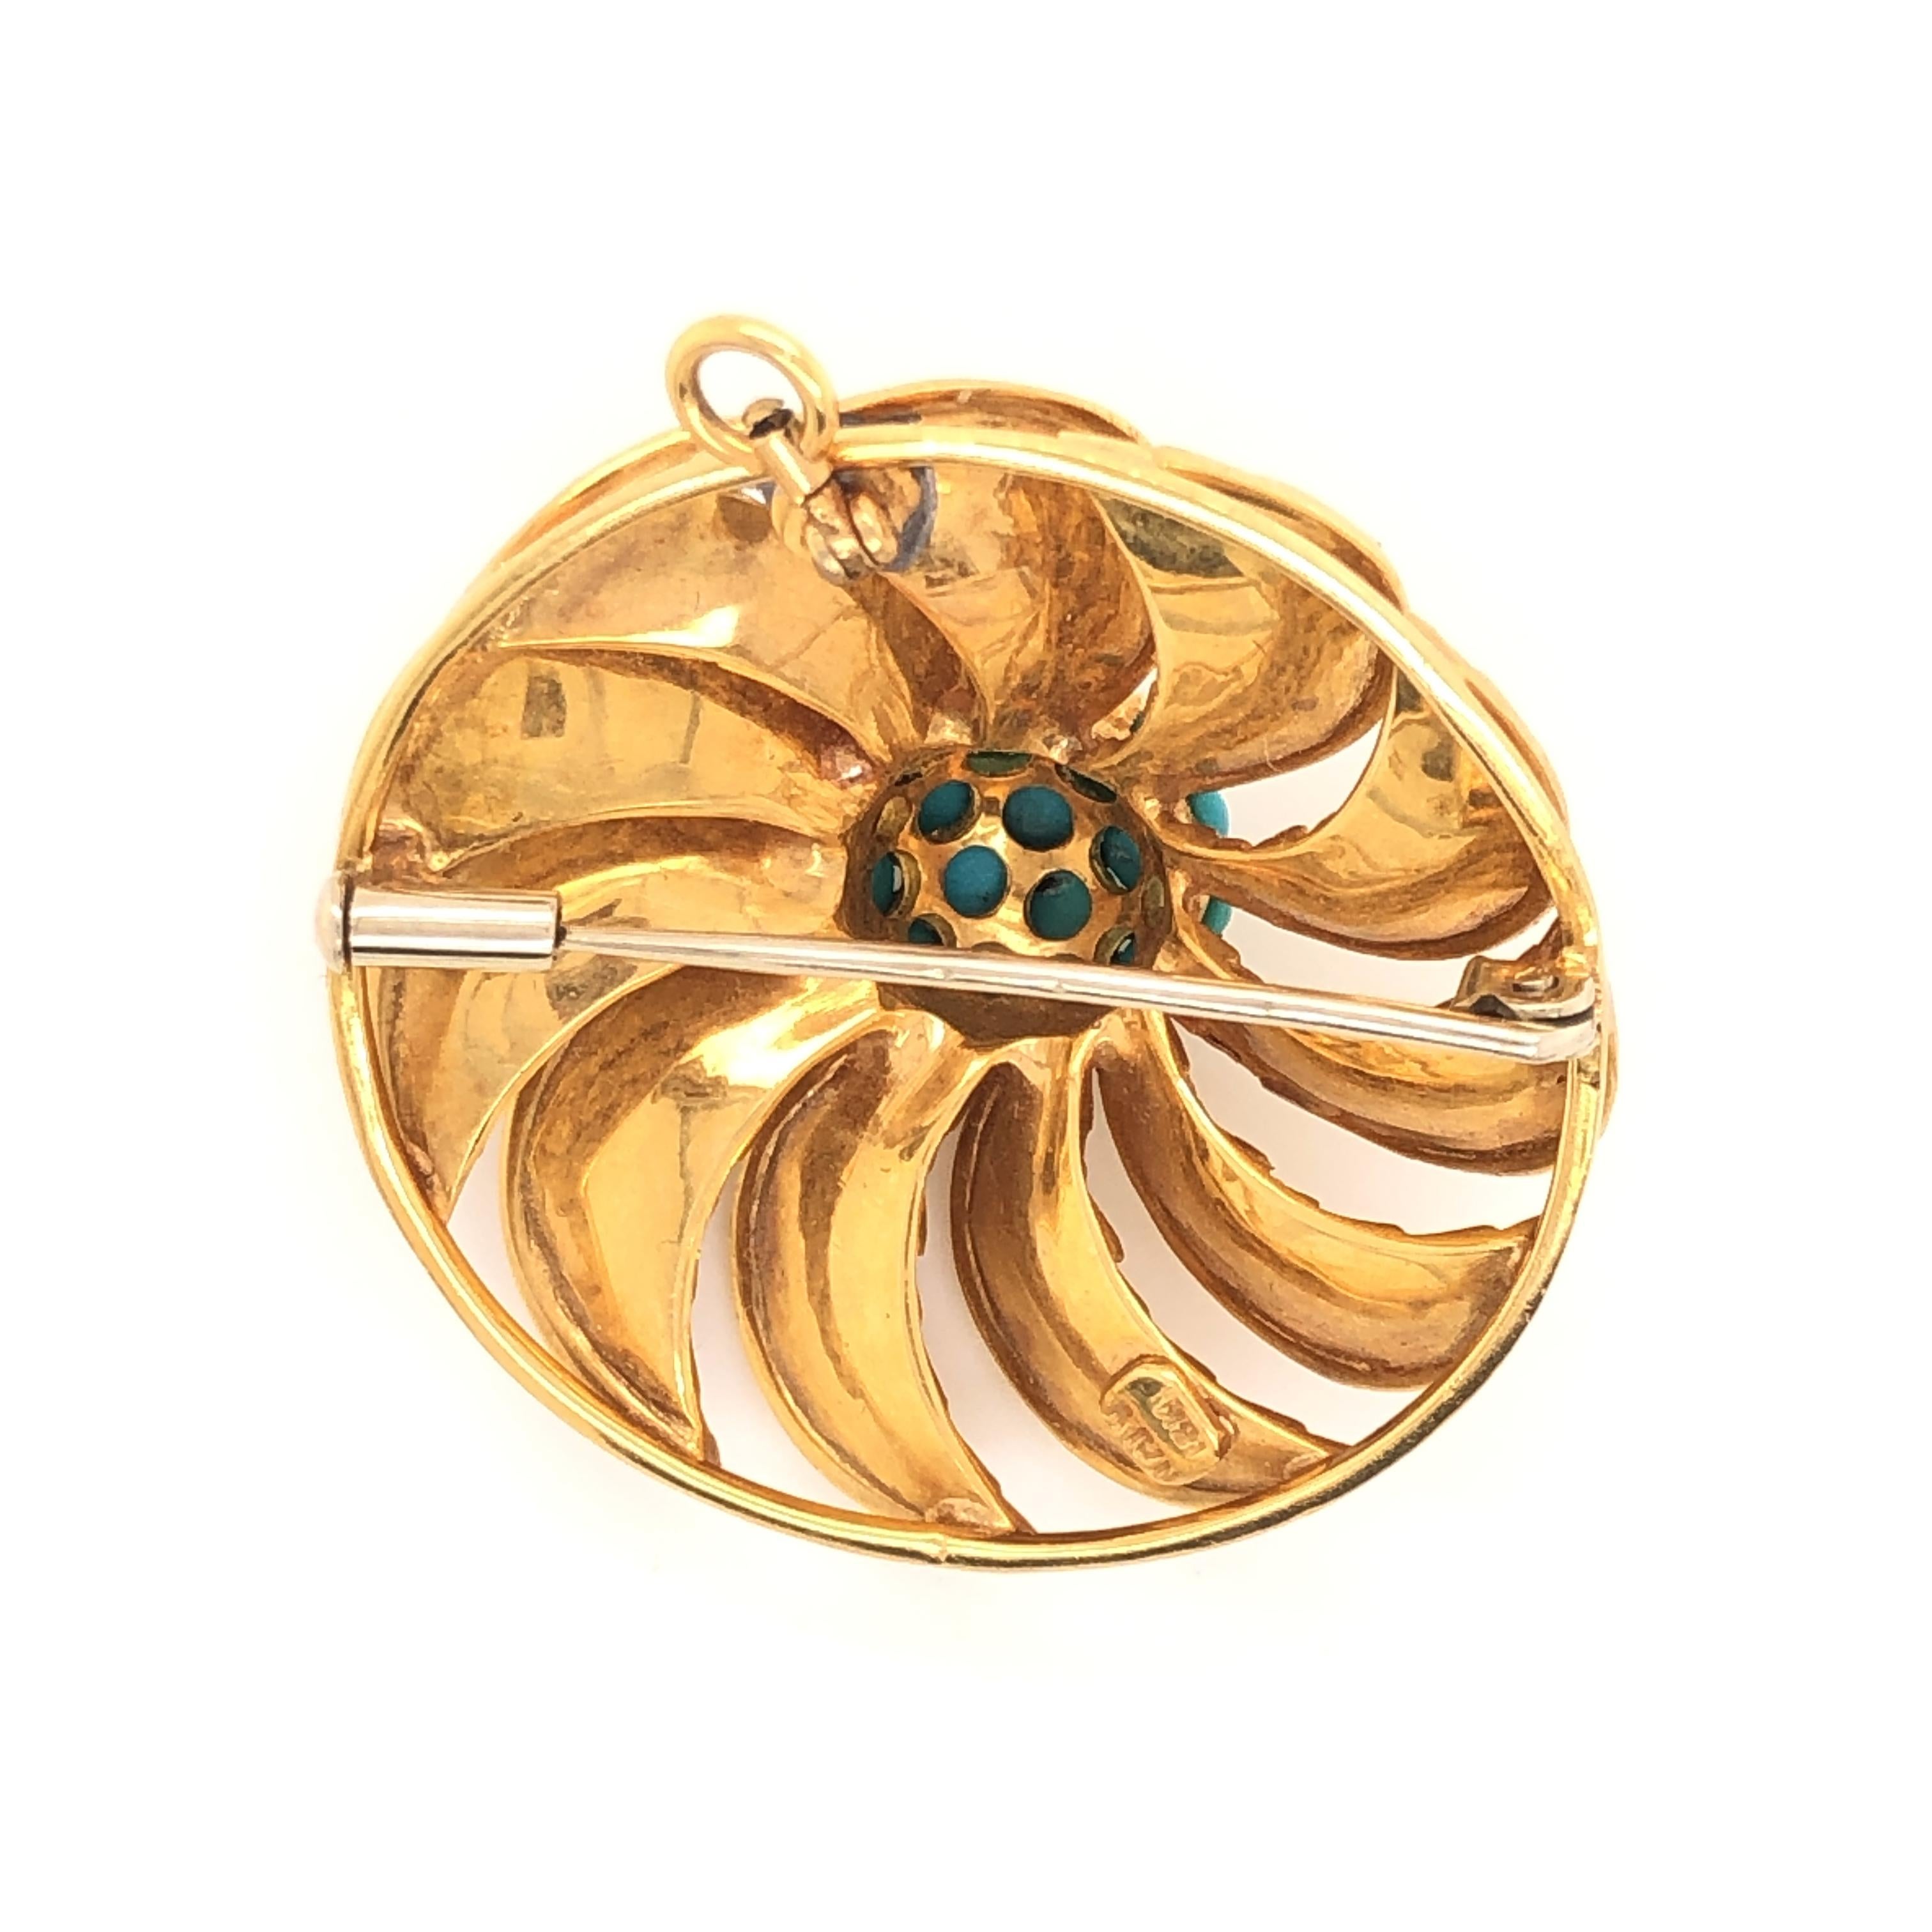 Turquoise Textured Gold Leaf Floral Flower Circle Swirl Brooch Pendant In Good Condition For Sale In Miami Beach, FL